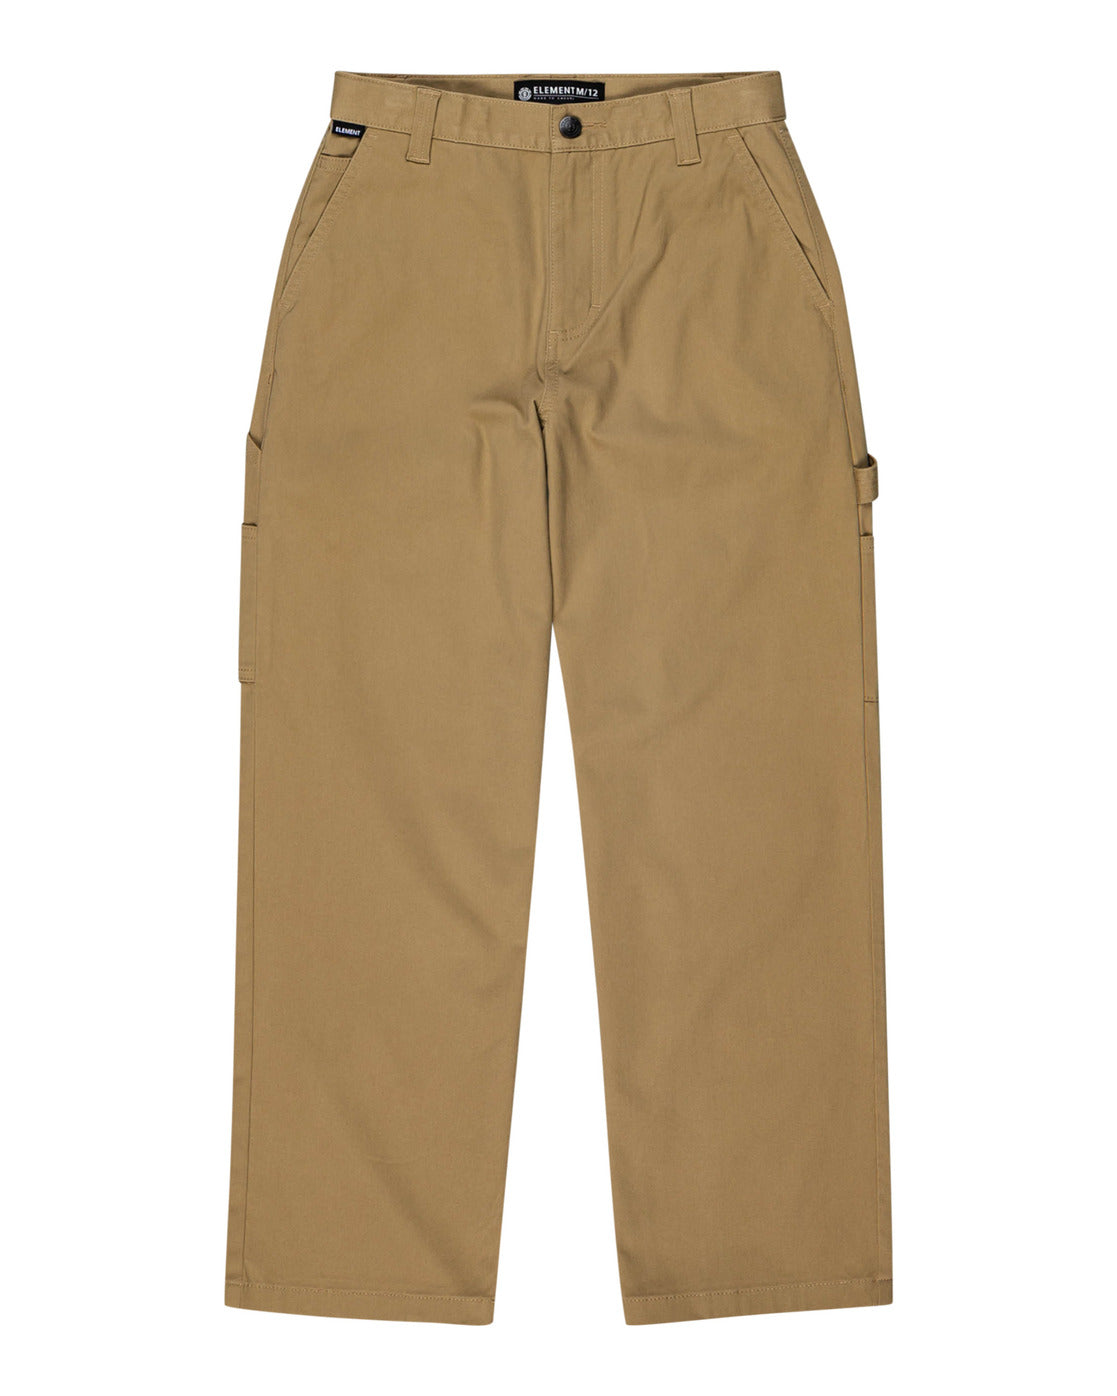 Element Paz Twill Pant Youth